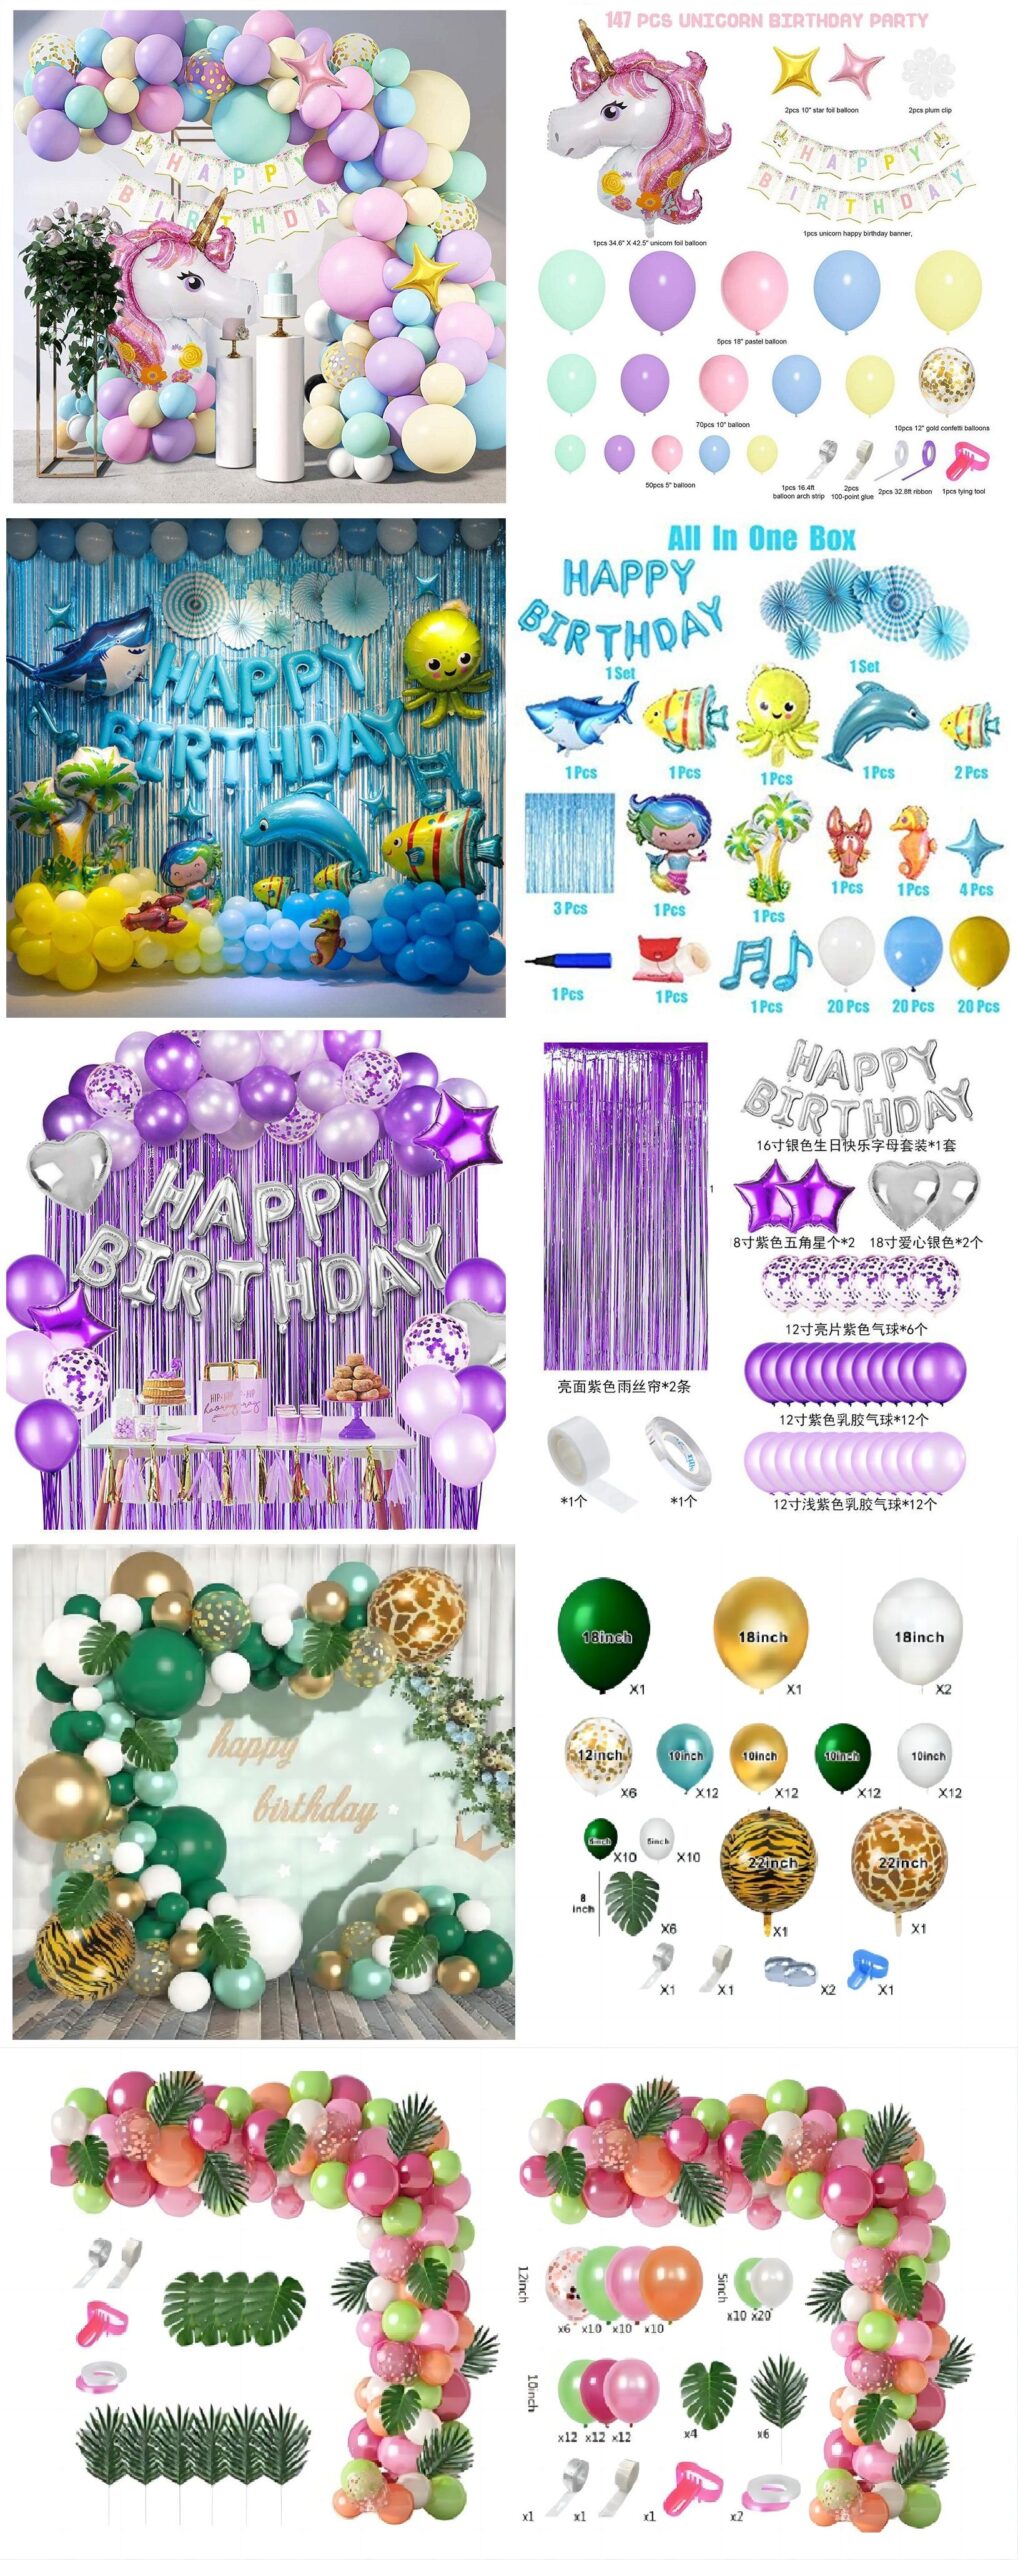 Wholesale Party Supplies Balloons2